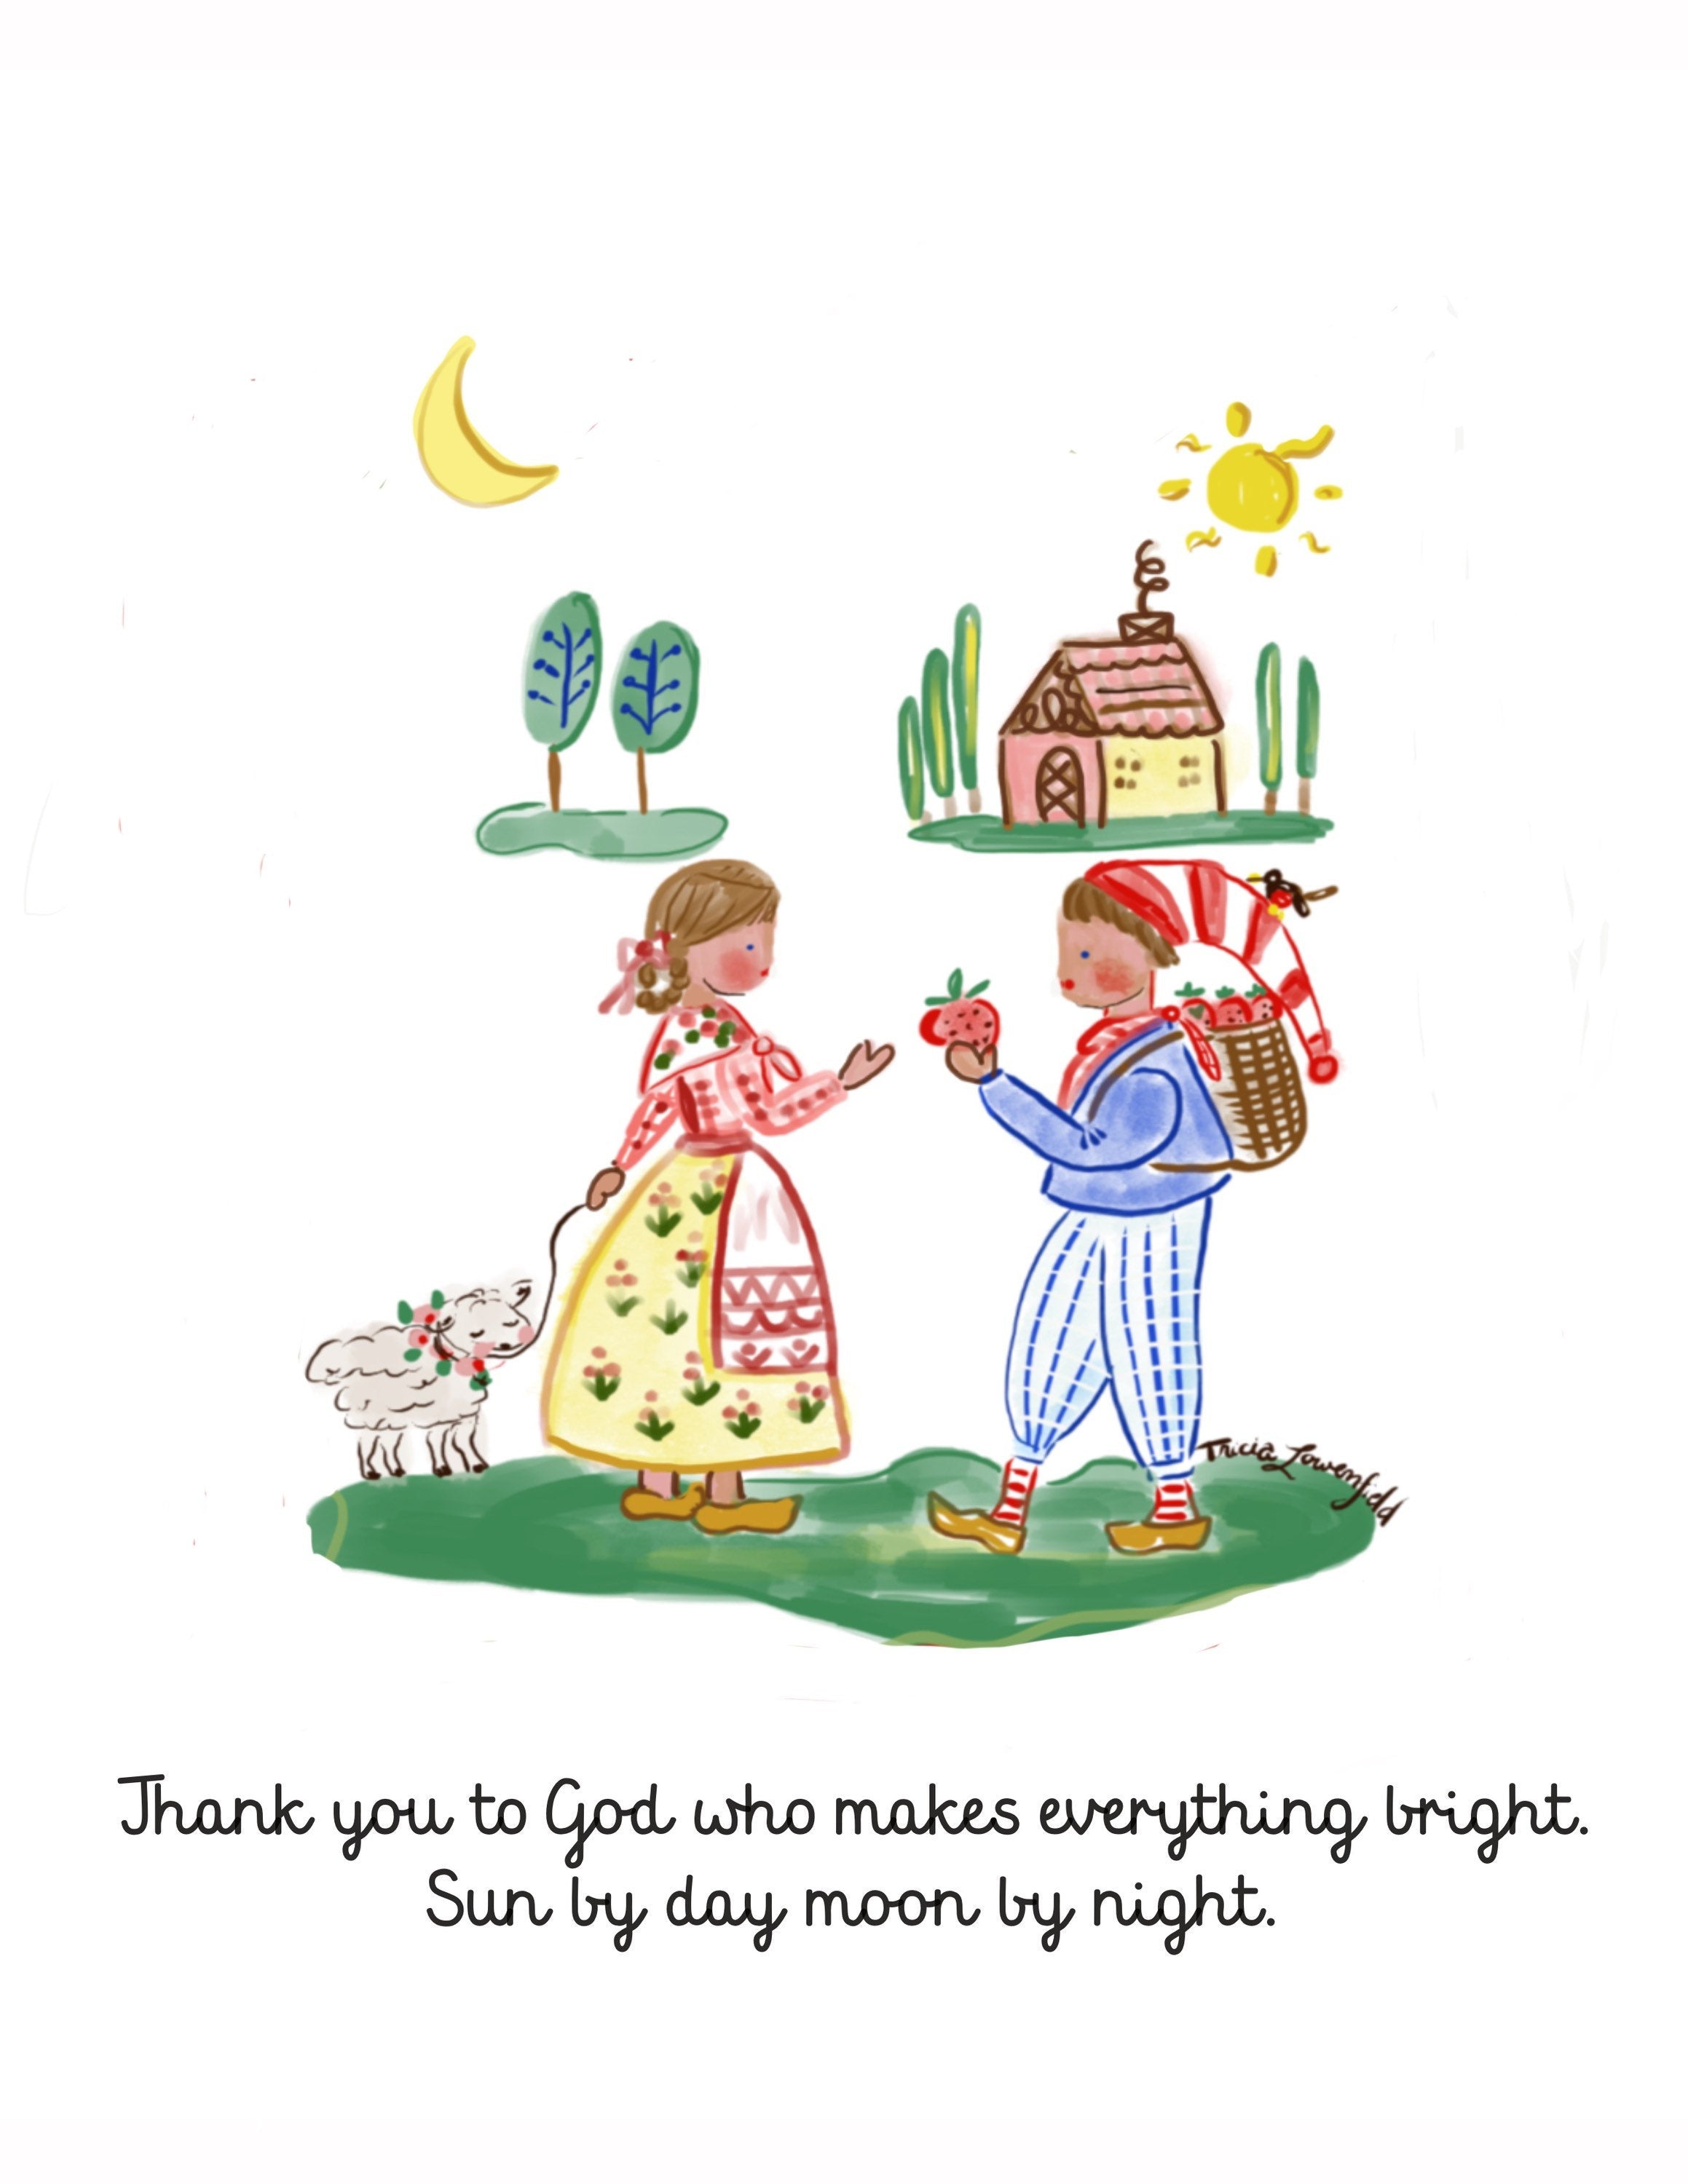 Thank You So Book, Learning to Give Thanks, Children’s Book - Tricia Lowenfield Design